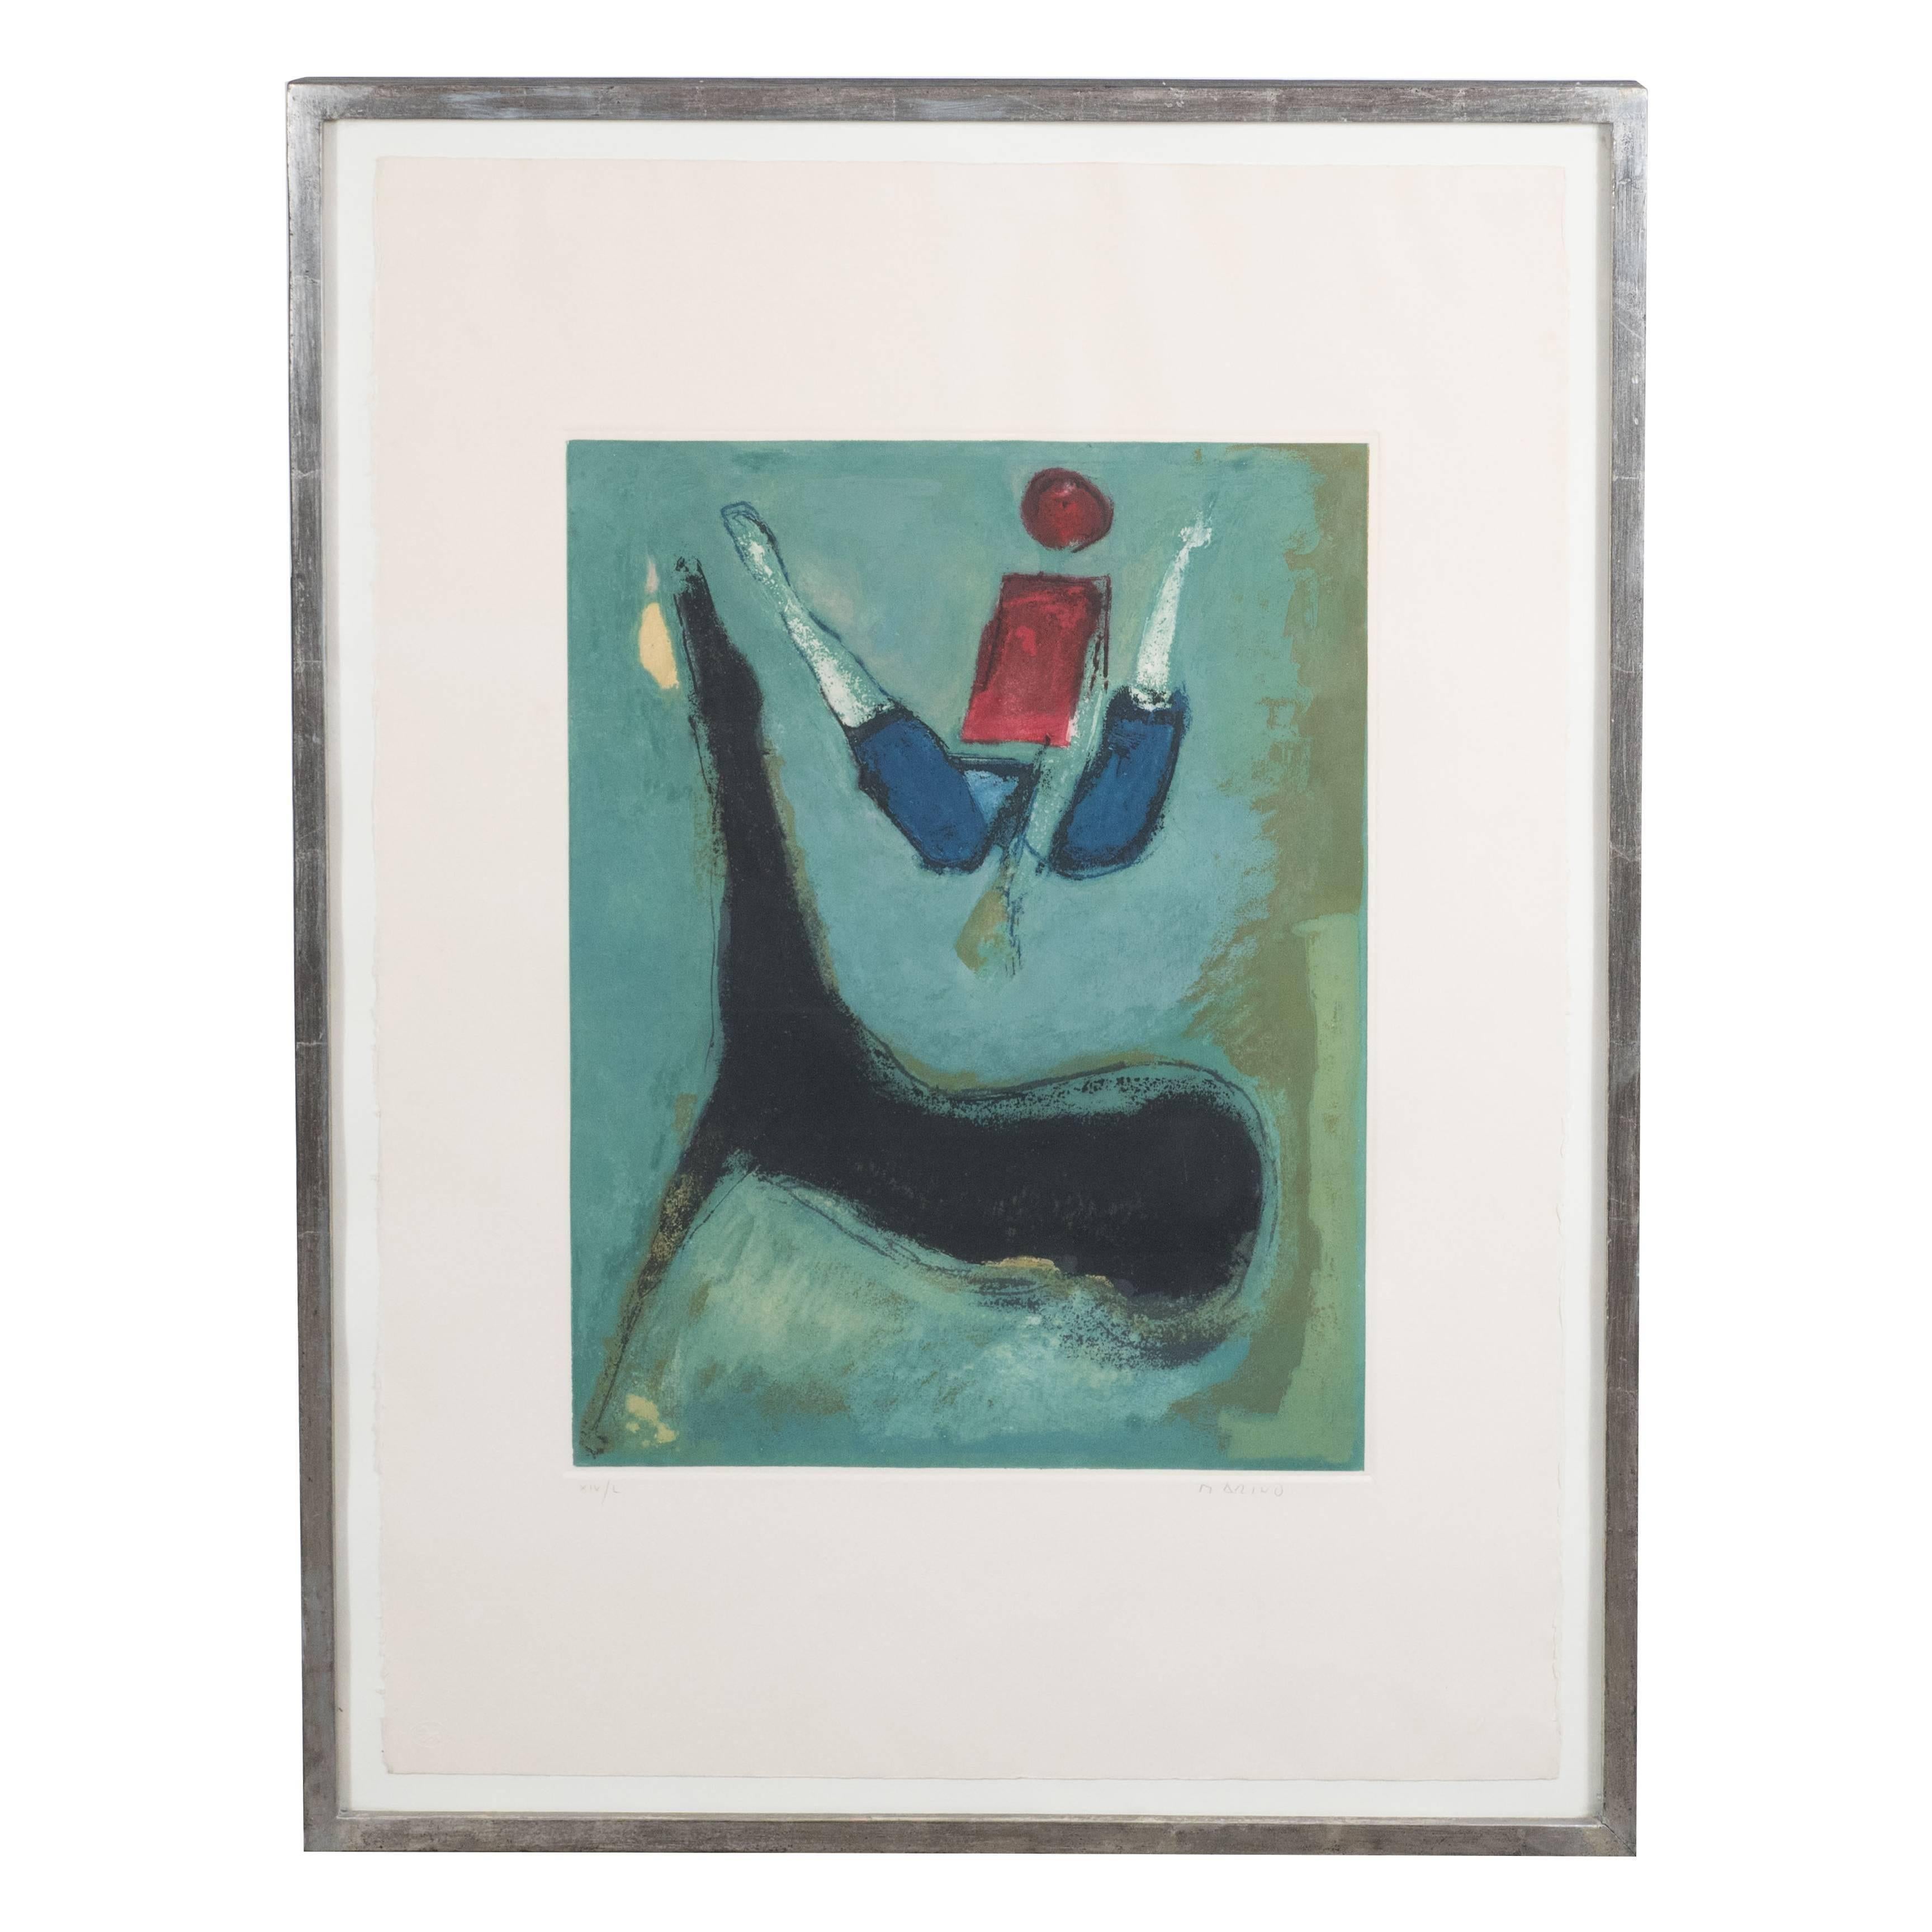 This vibrant and iconic lithograph in colors was realized by the acclaimed Italian artist Marino Marini, circa 1970. A contemporary of Jean Arp, Alexander Calder and Henry Moore, Marini is best known for his figurative equestrian themed artworks.